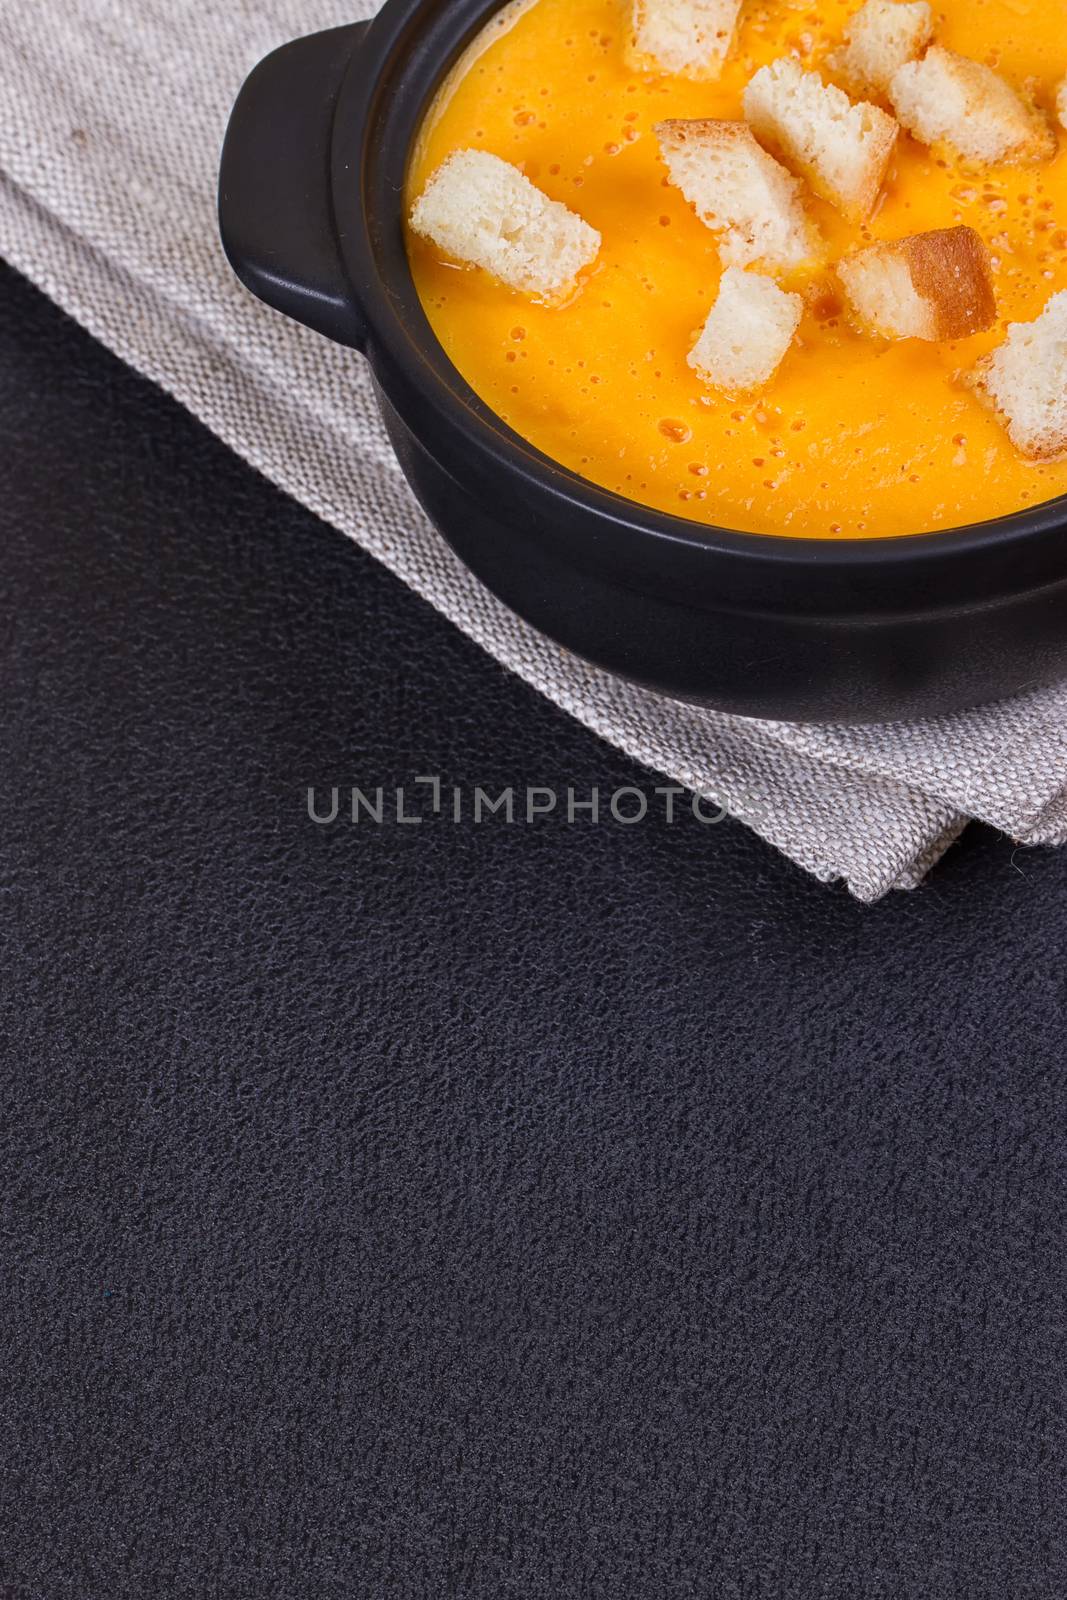 Pumpkin and carrot soup with cream and parsley by victosha